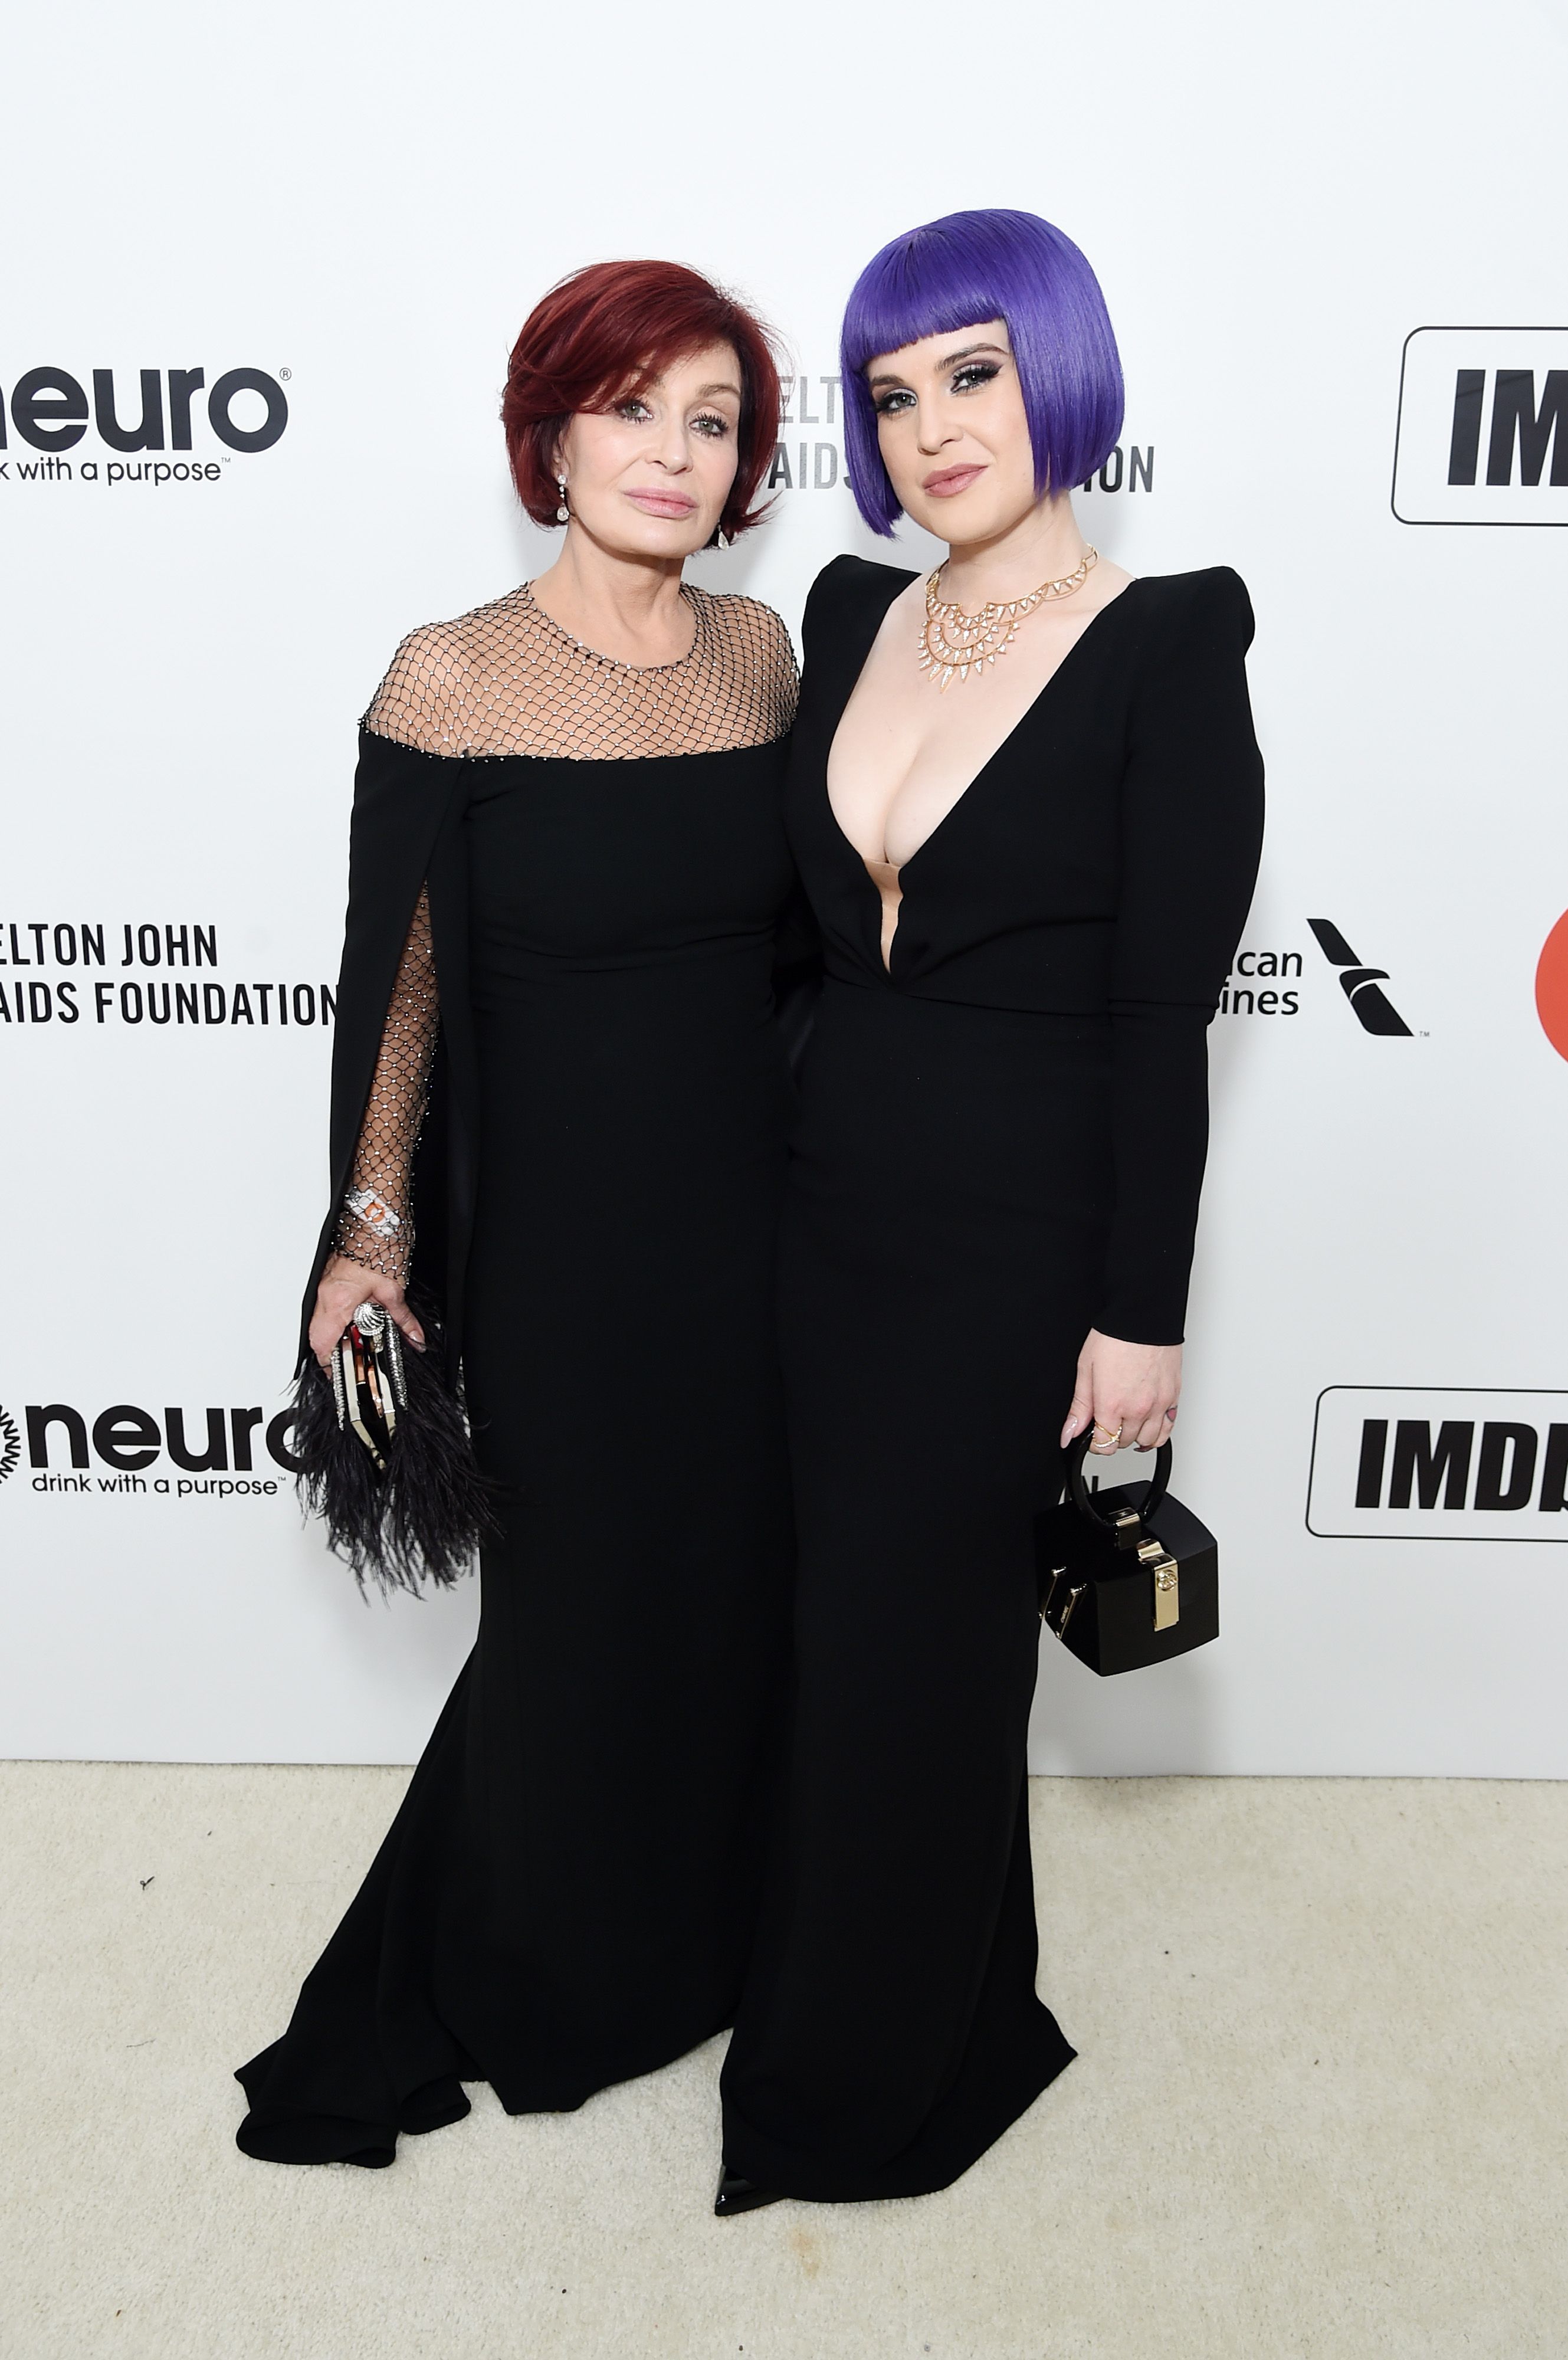 Sharon Osbourne and Kelly Osbourne during the 28th Annual Elton John AIDS Foundation Academy Awards Viewing Party on February 9, 2020, in West Hollywood, California. | Source: Getty Images